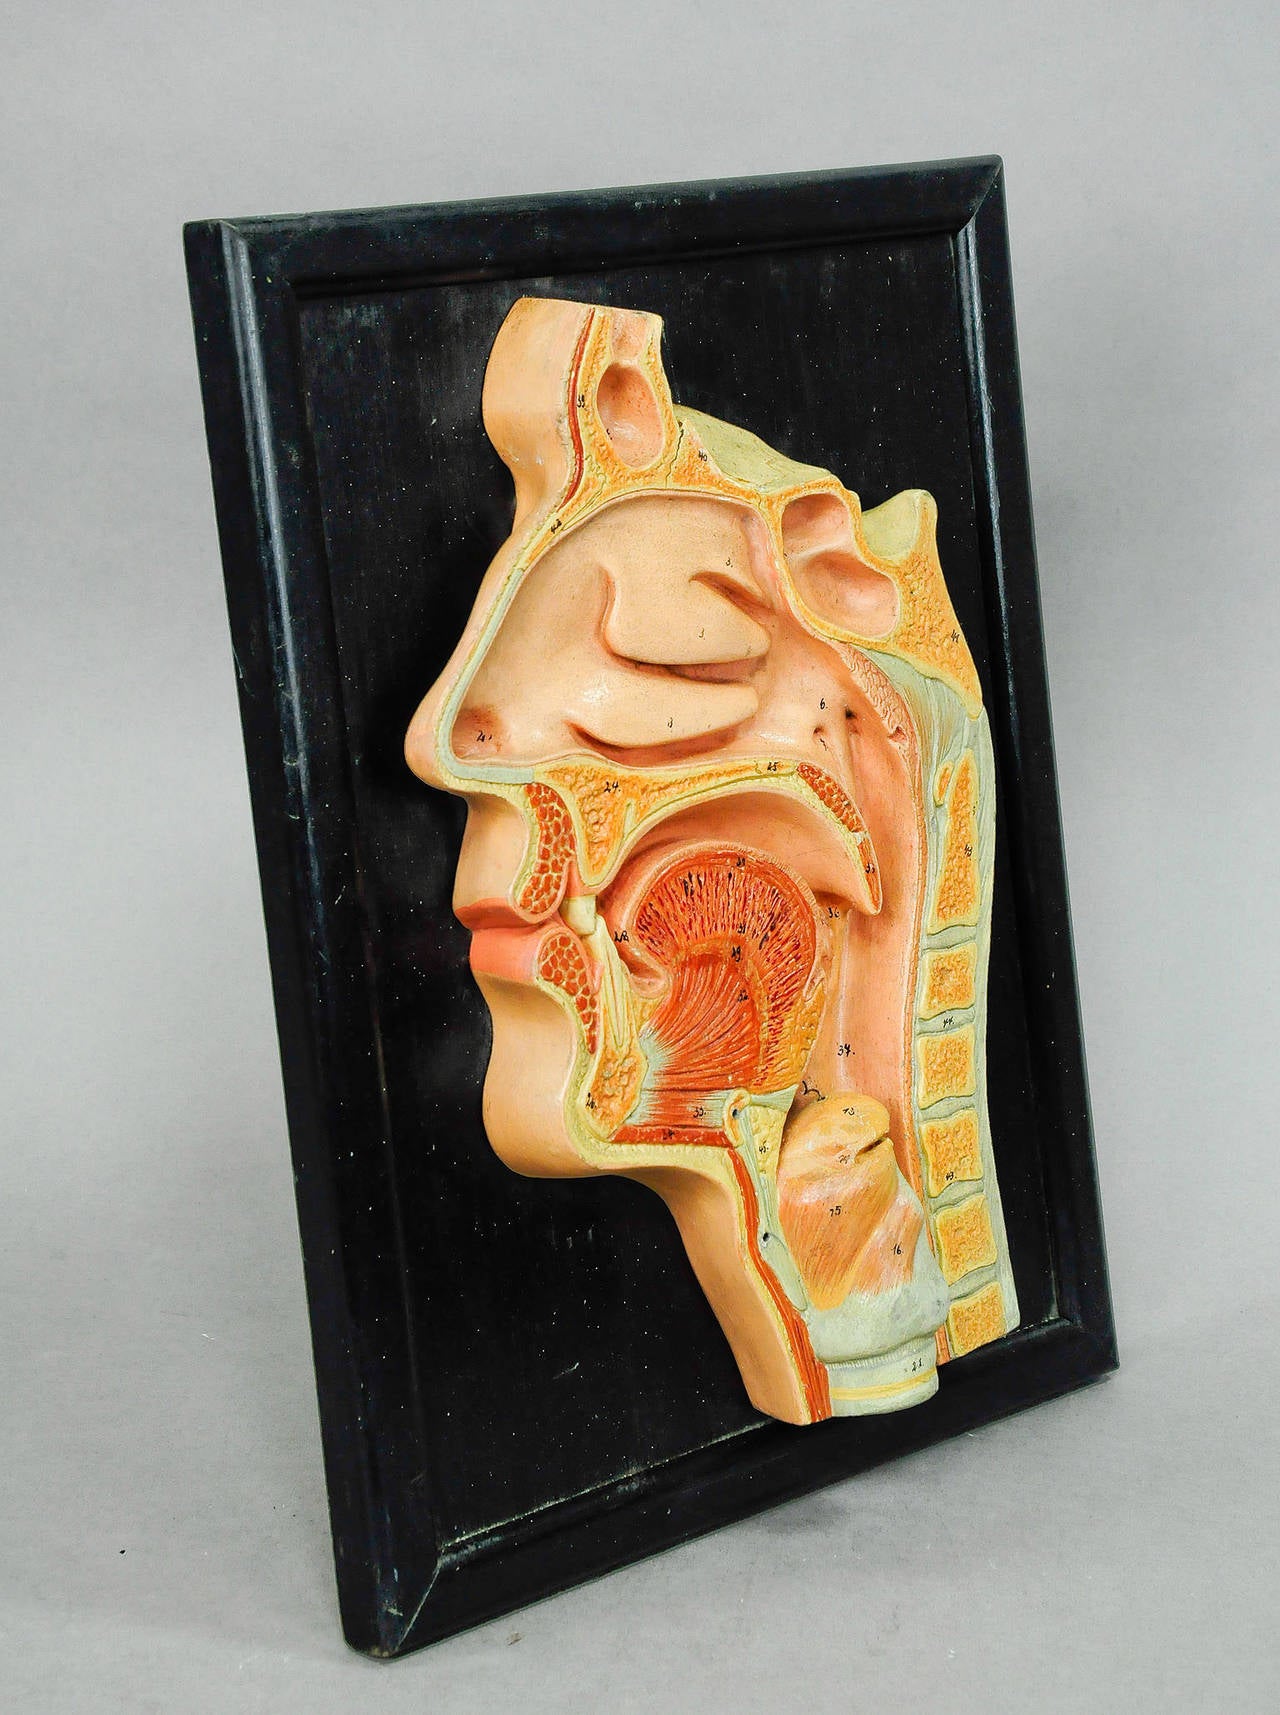 An antique hand-painted and hand lettered anatomical wall head model for class. Made of wood, papier mâché and plaster. Moveable cardia, Germany, circa 1910.